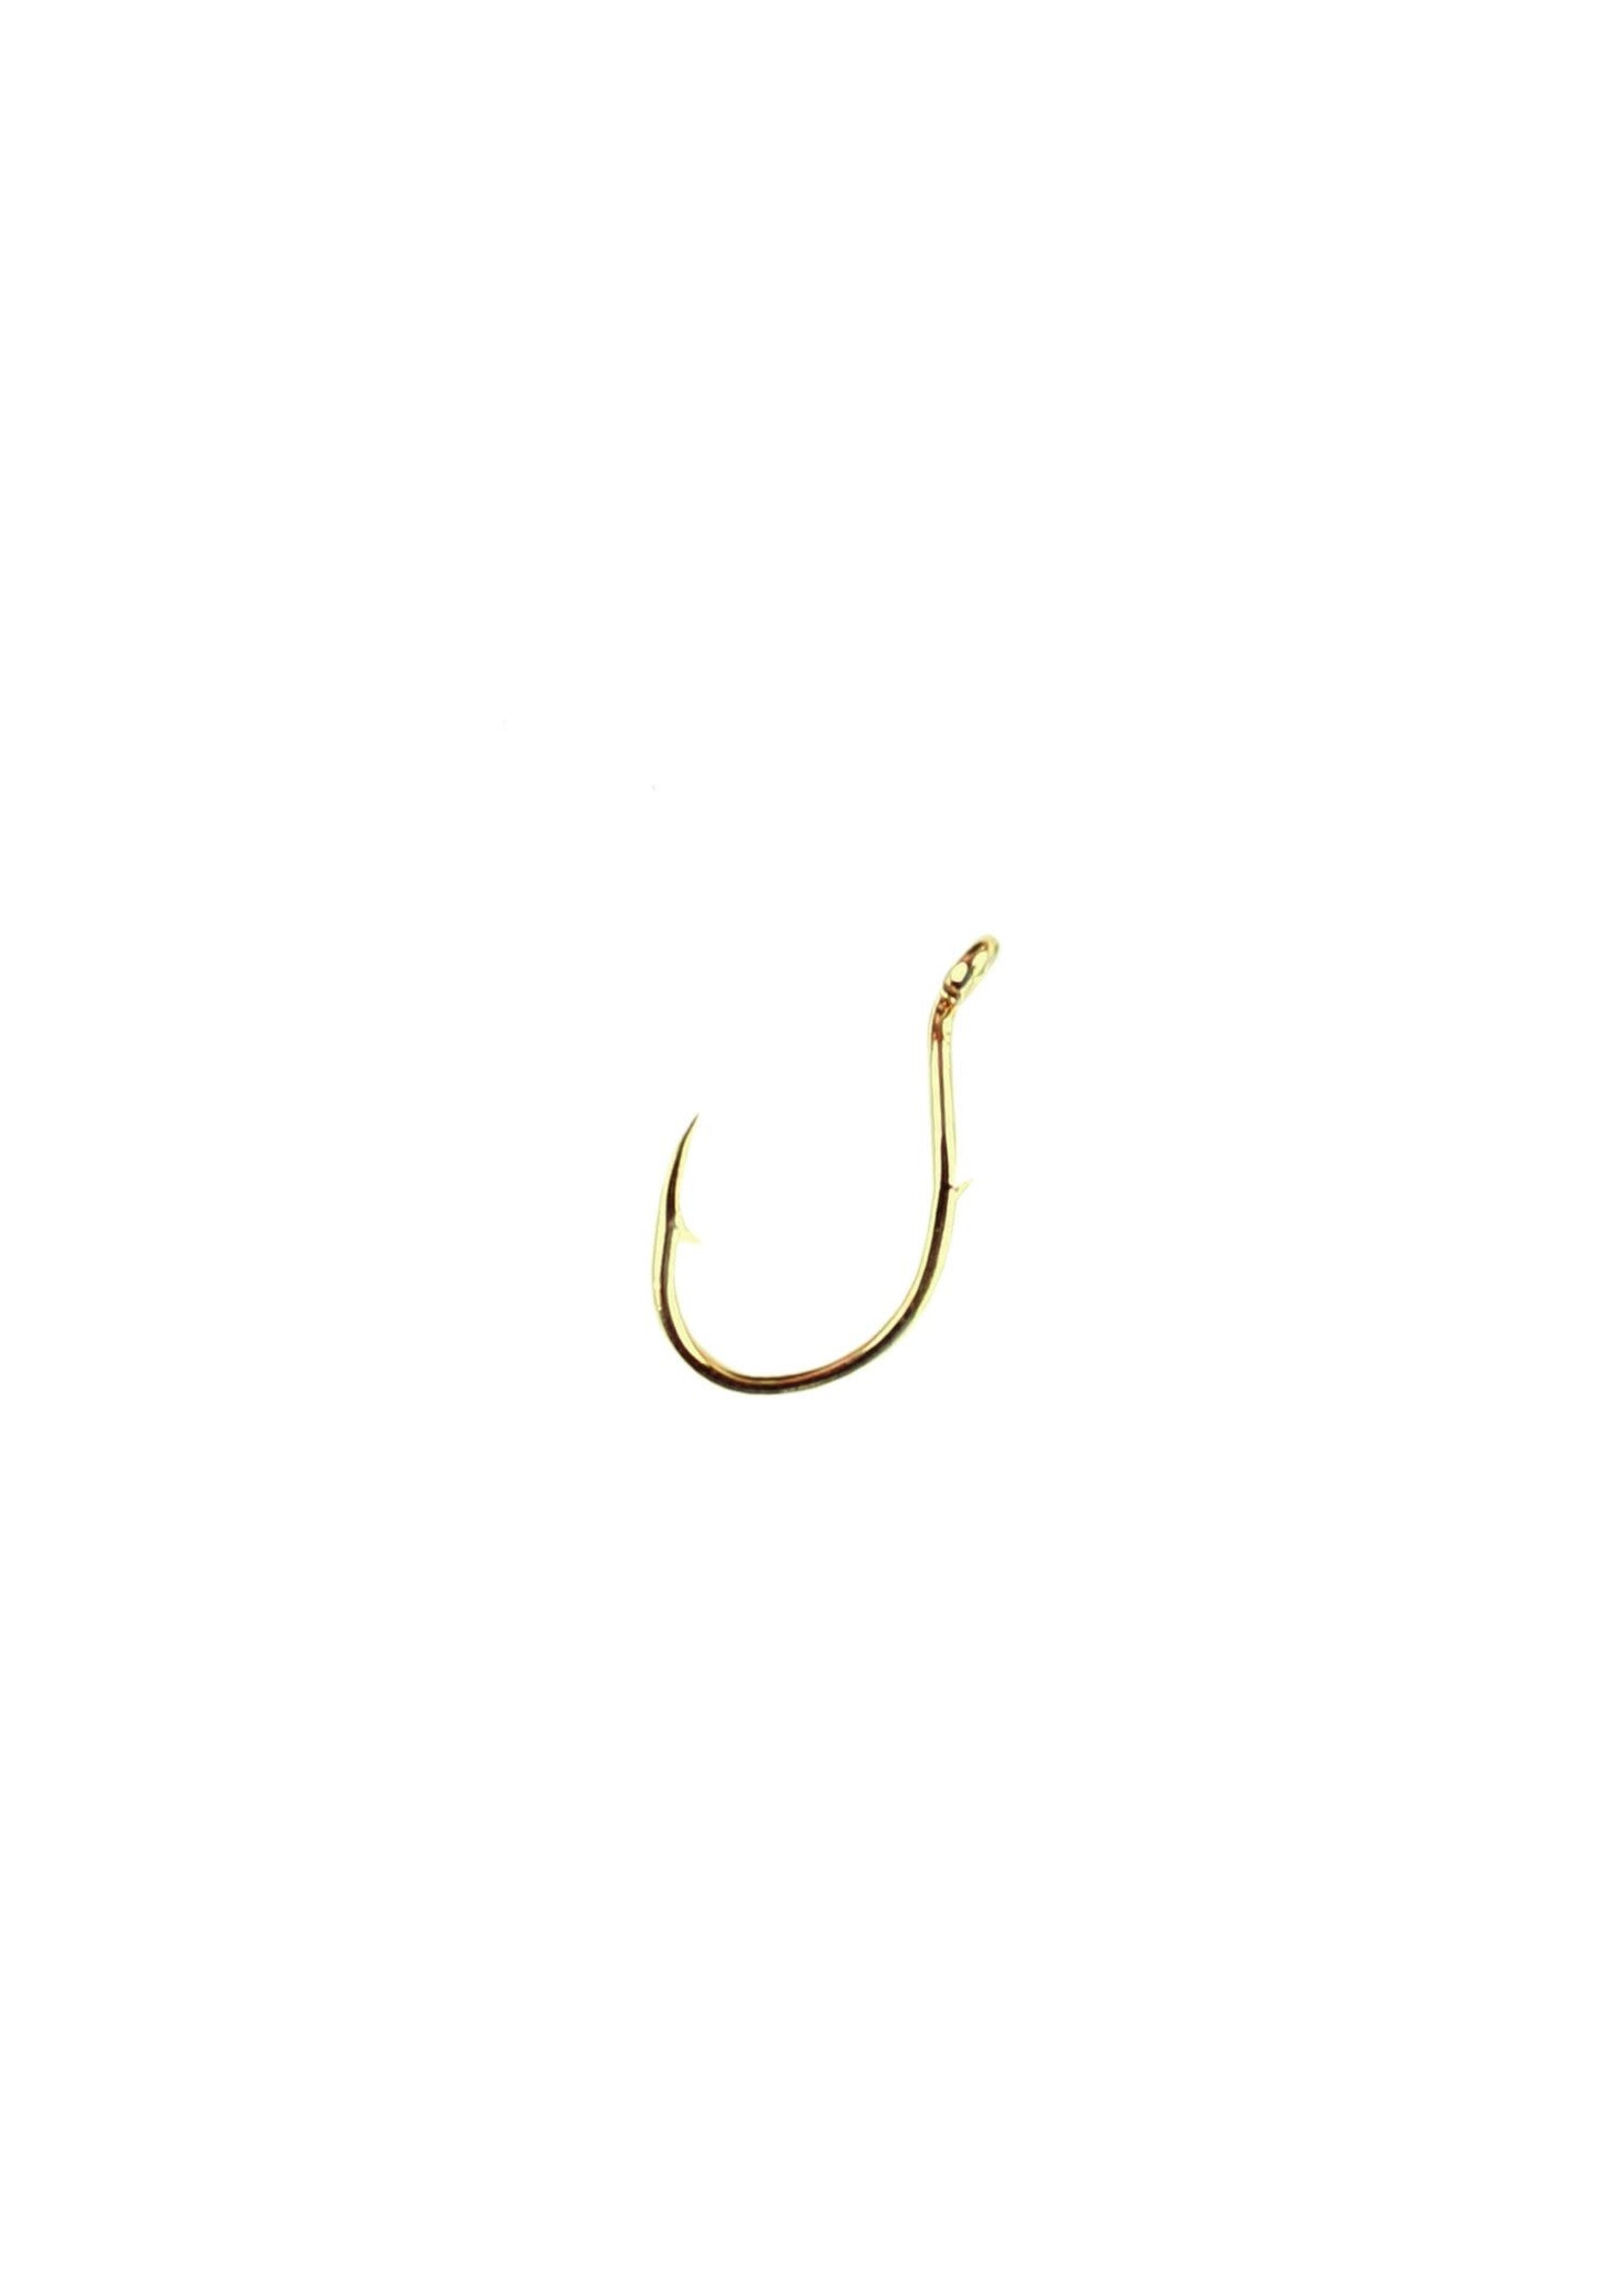 Eagle Claw Eagle Claw Salmon Egg Hook - 50 Pack